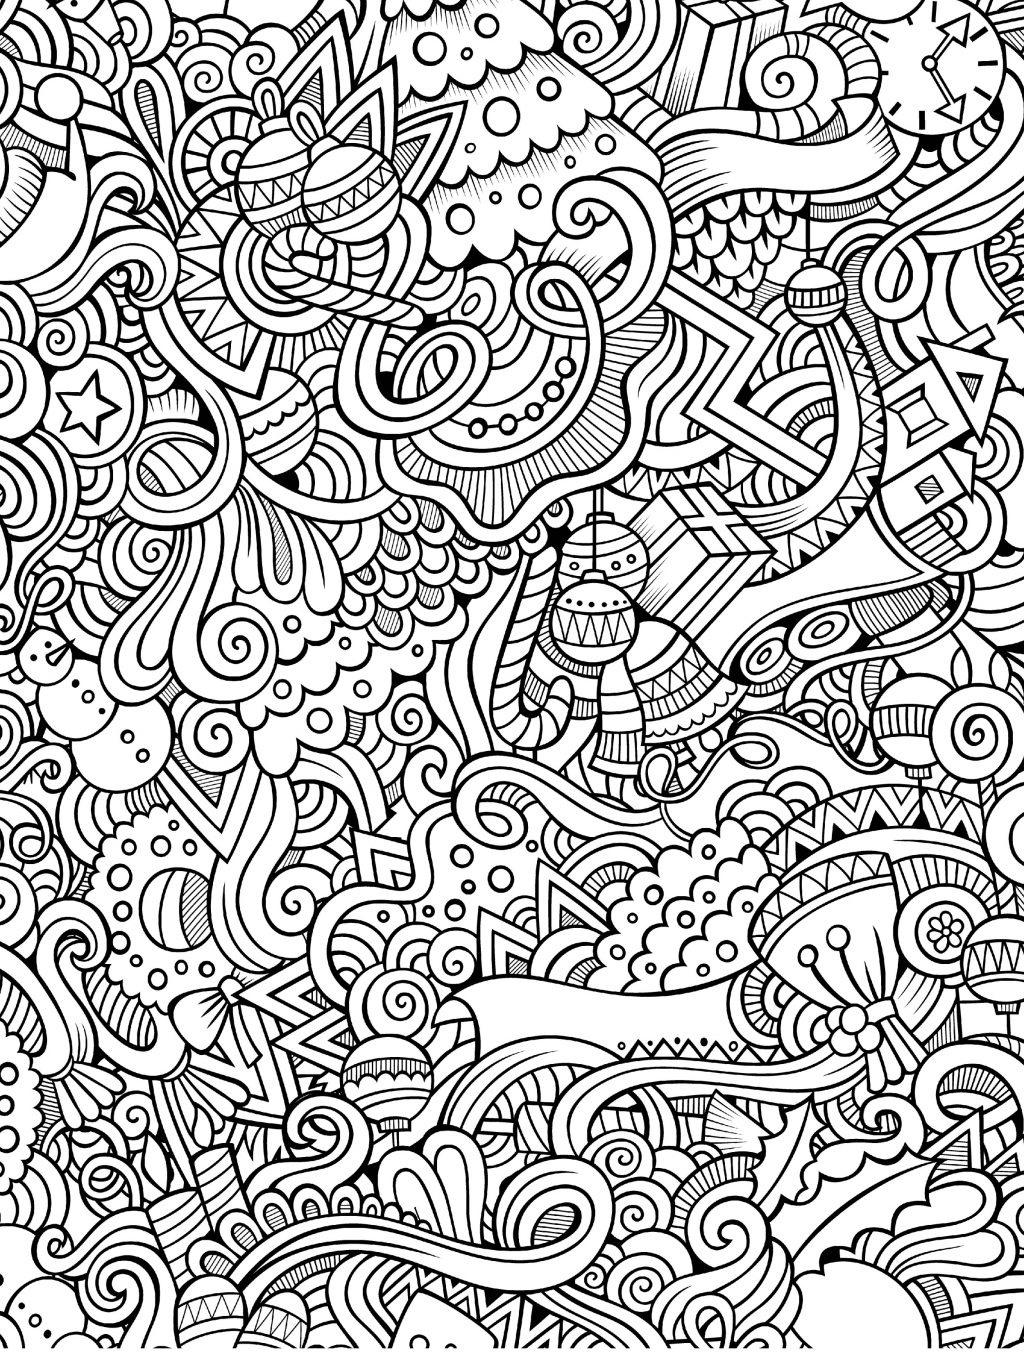 Coloring Ideas : Free Printable Coloring Books For Kids Cheap - Free Printable Coloring Books Pdf